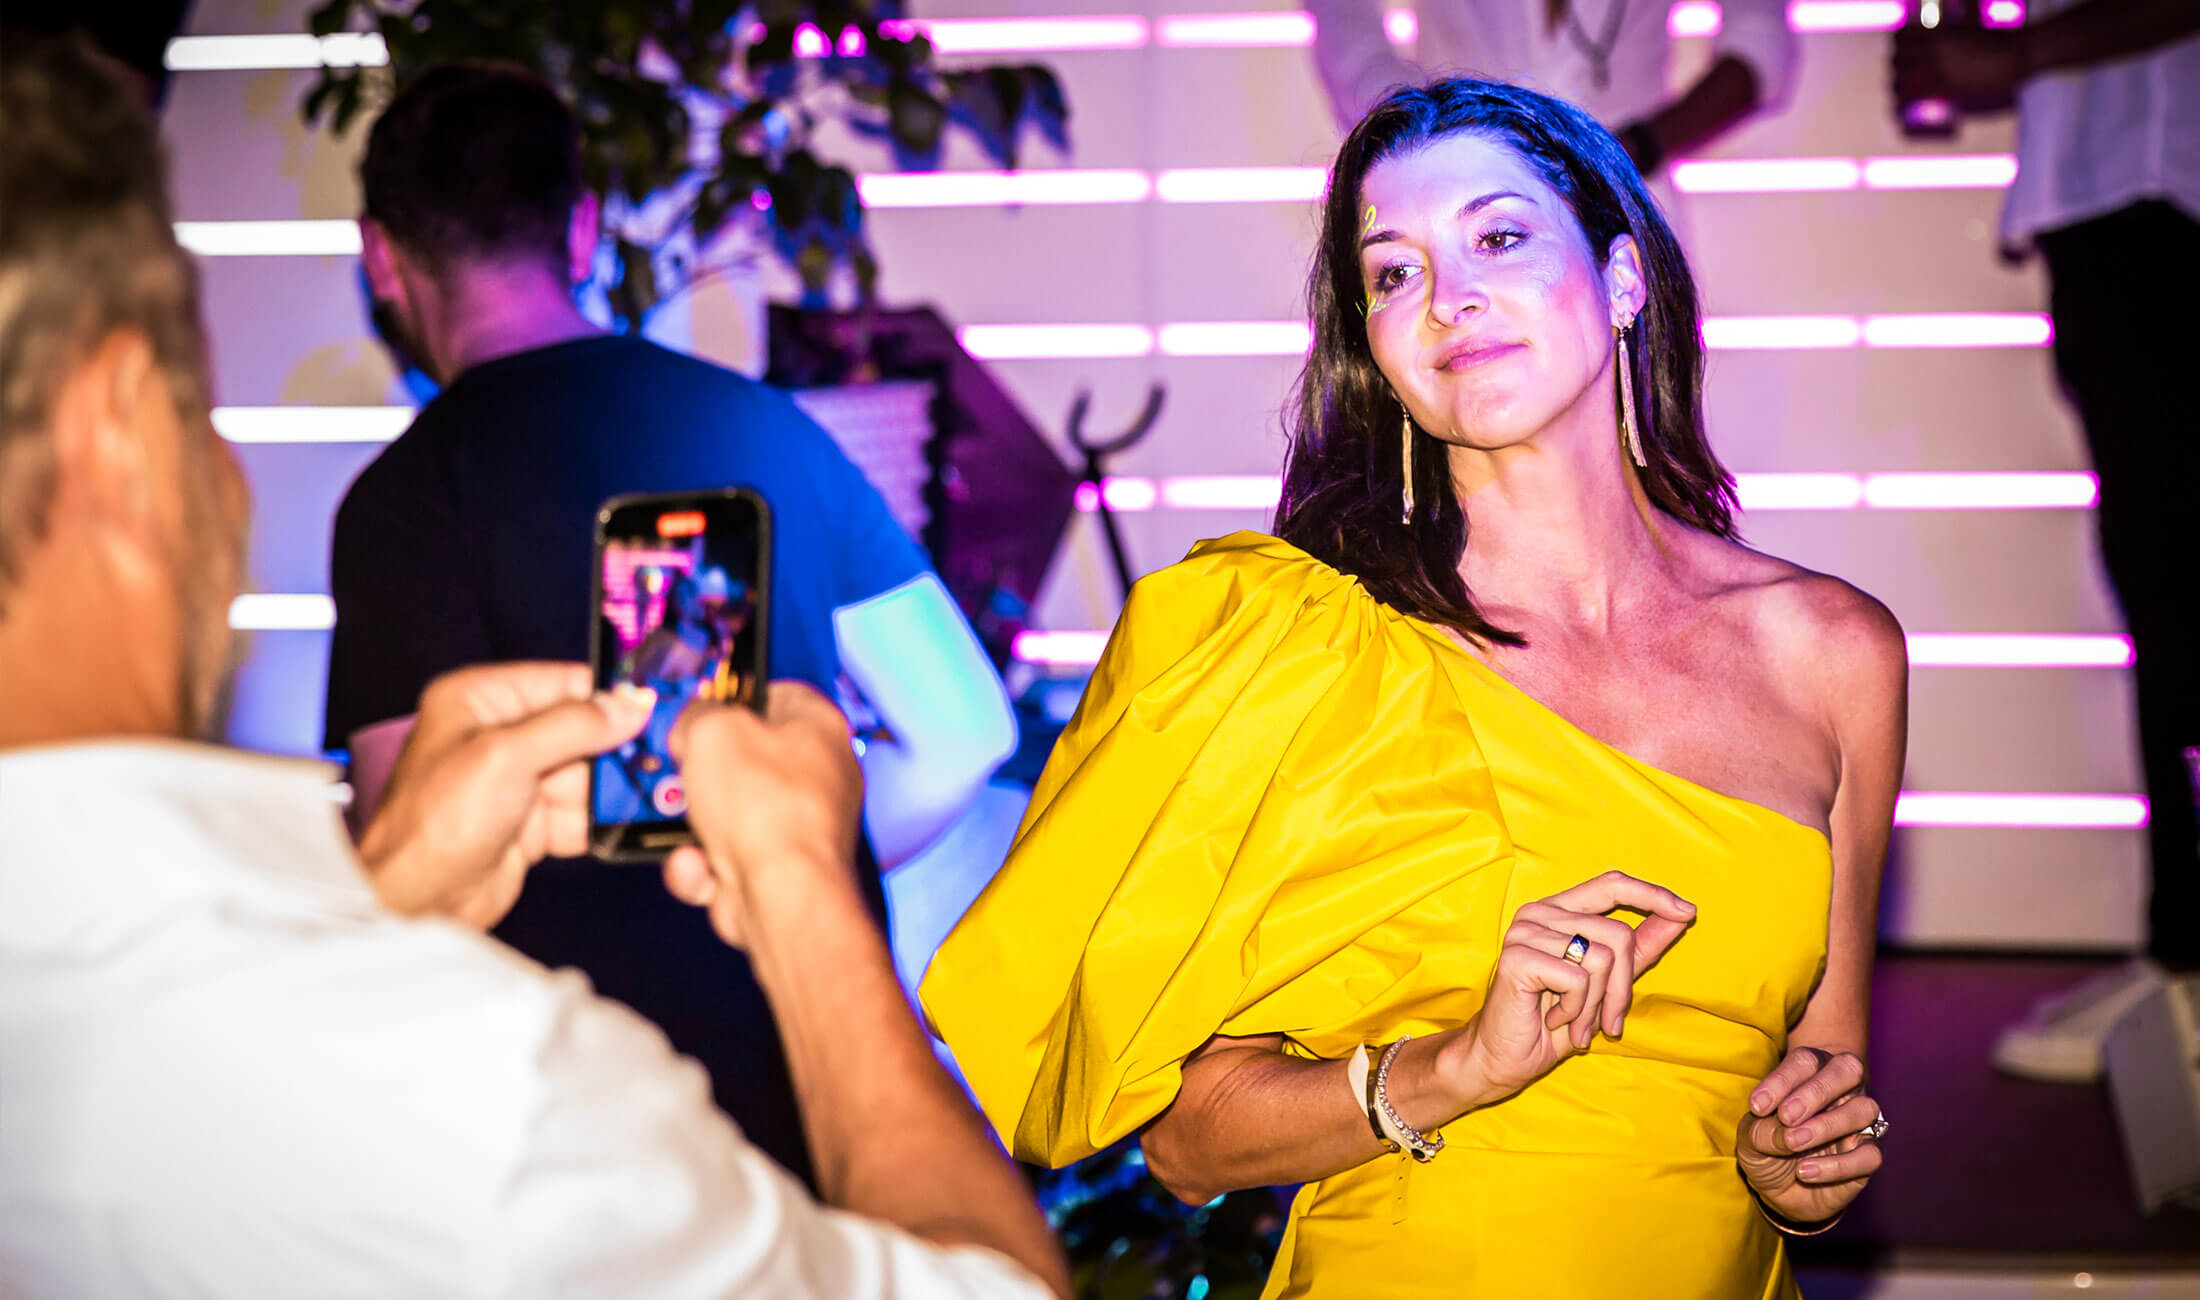 Run To guest wearing yellow dress on yacht at party being filmed by guest on phone